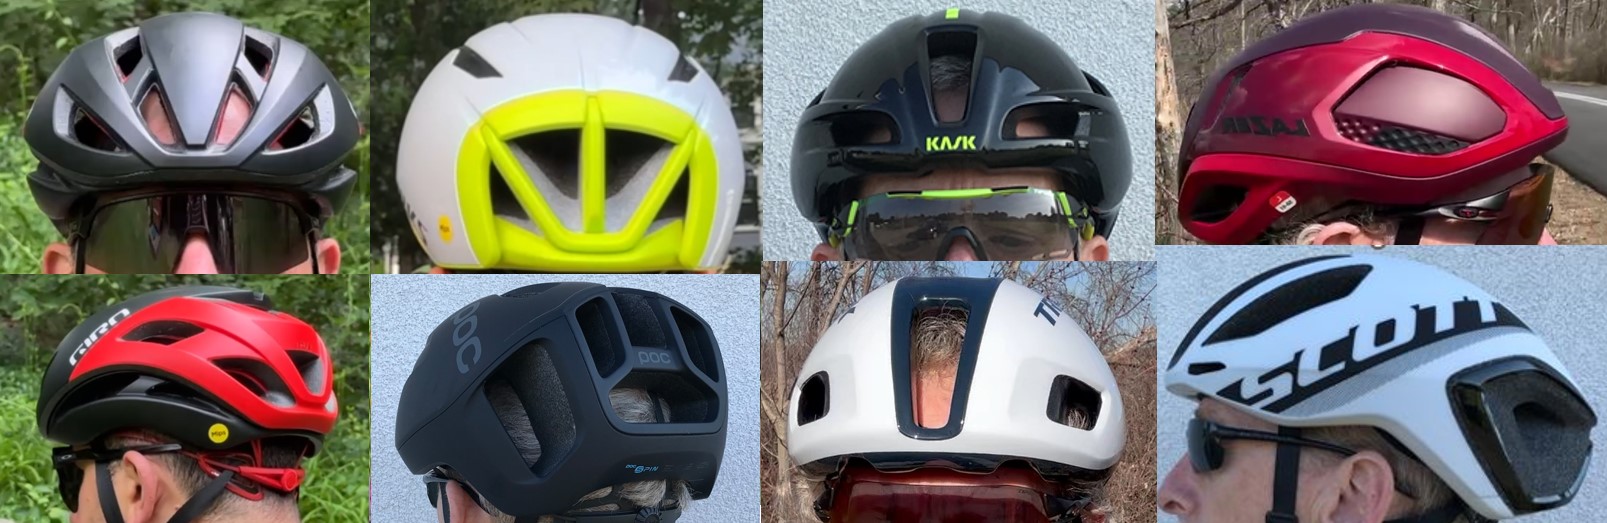 Half-Shell/Open-Face Helmets for Round Heads (Asian Fit)?